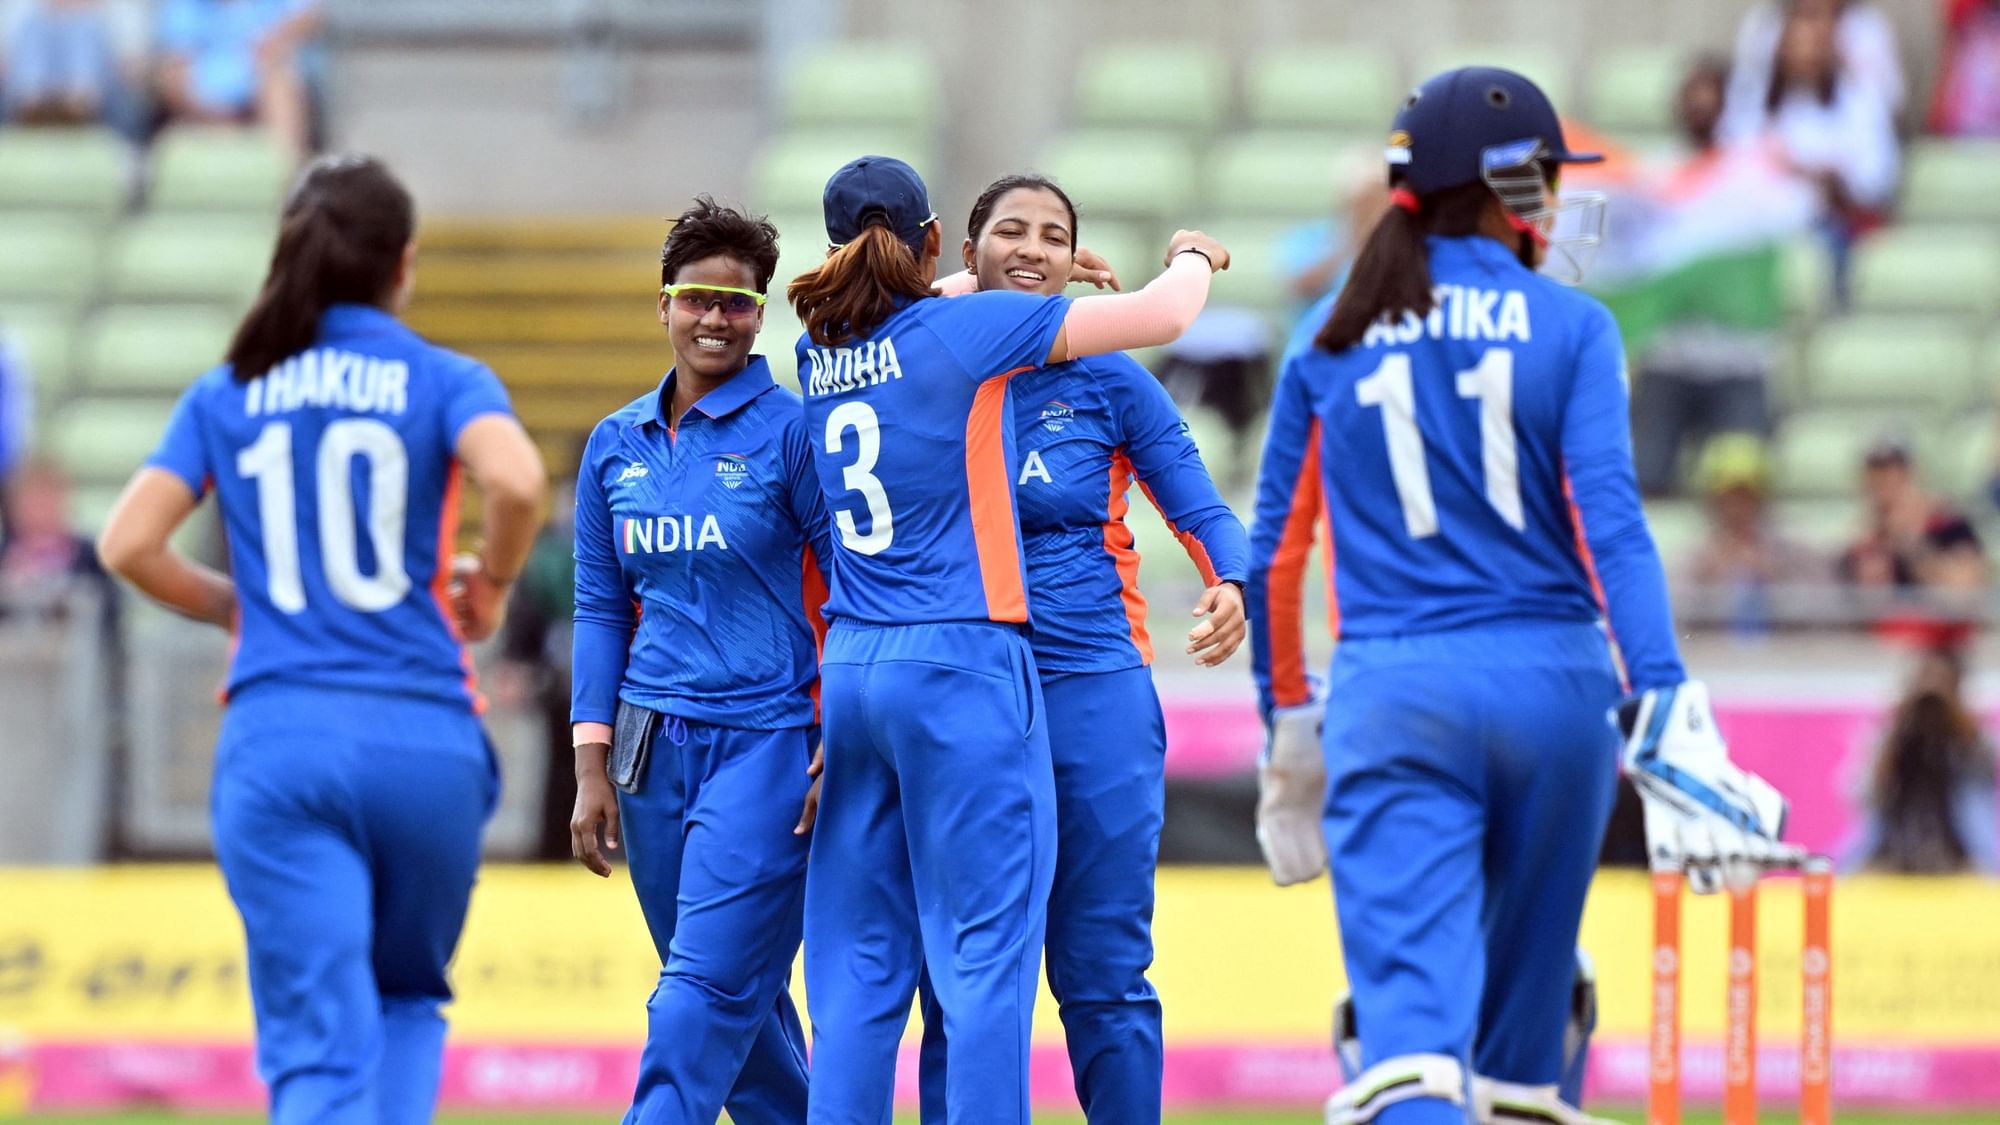 <div class="paragraphs"><p>Indian Women's Cricket Team in action at Edgbaston Cricket Ground during Commonwealth Games 2022.</p></div>